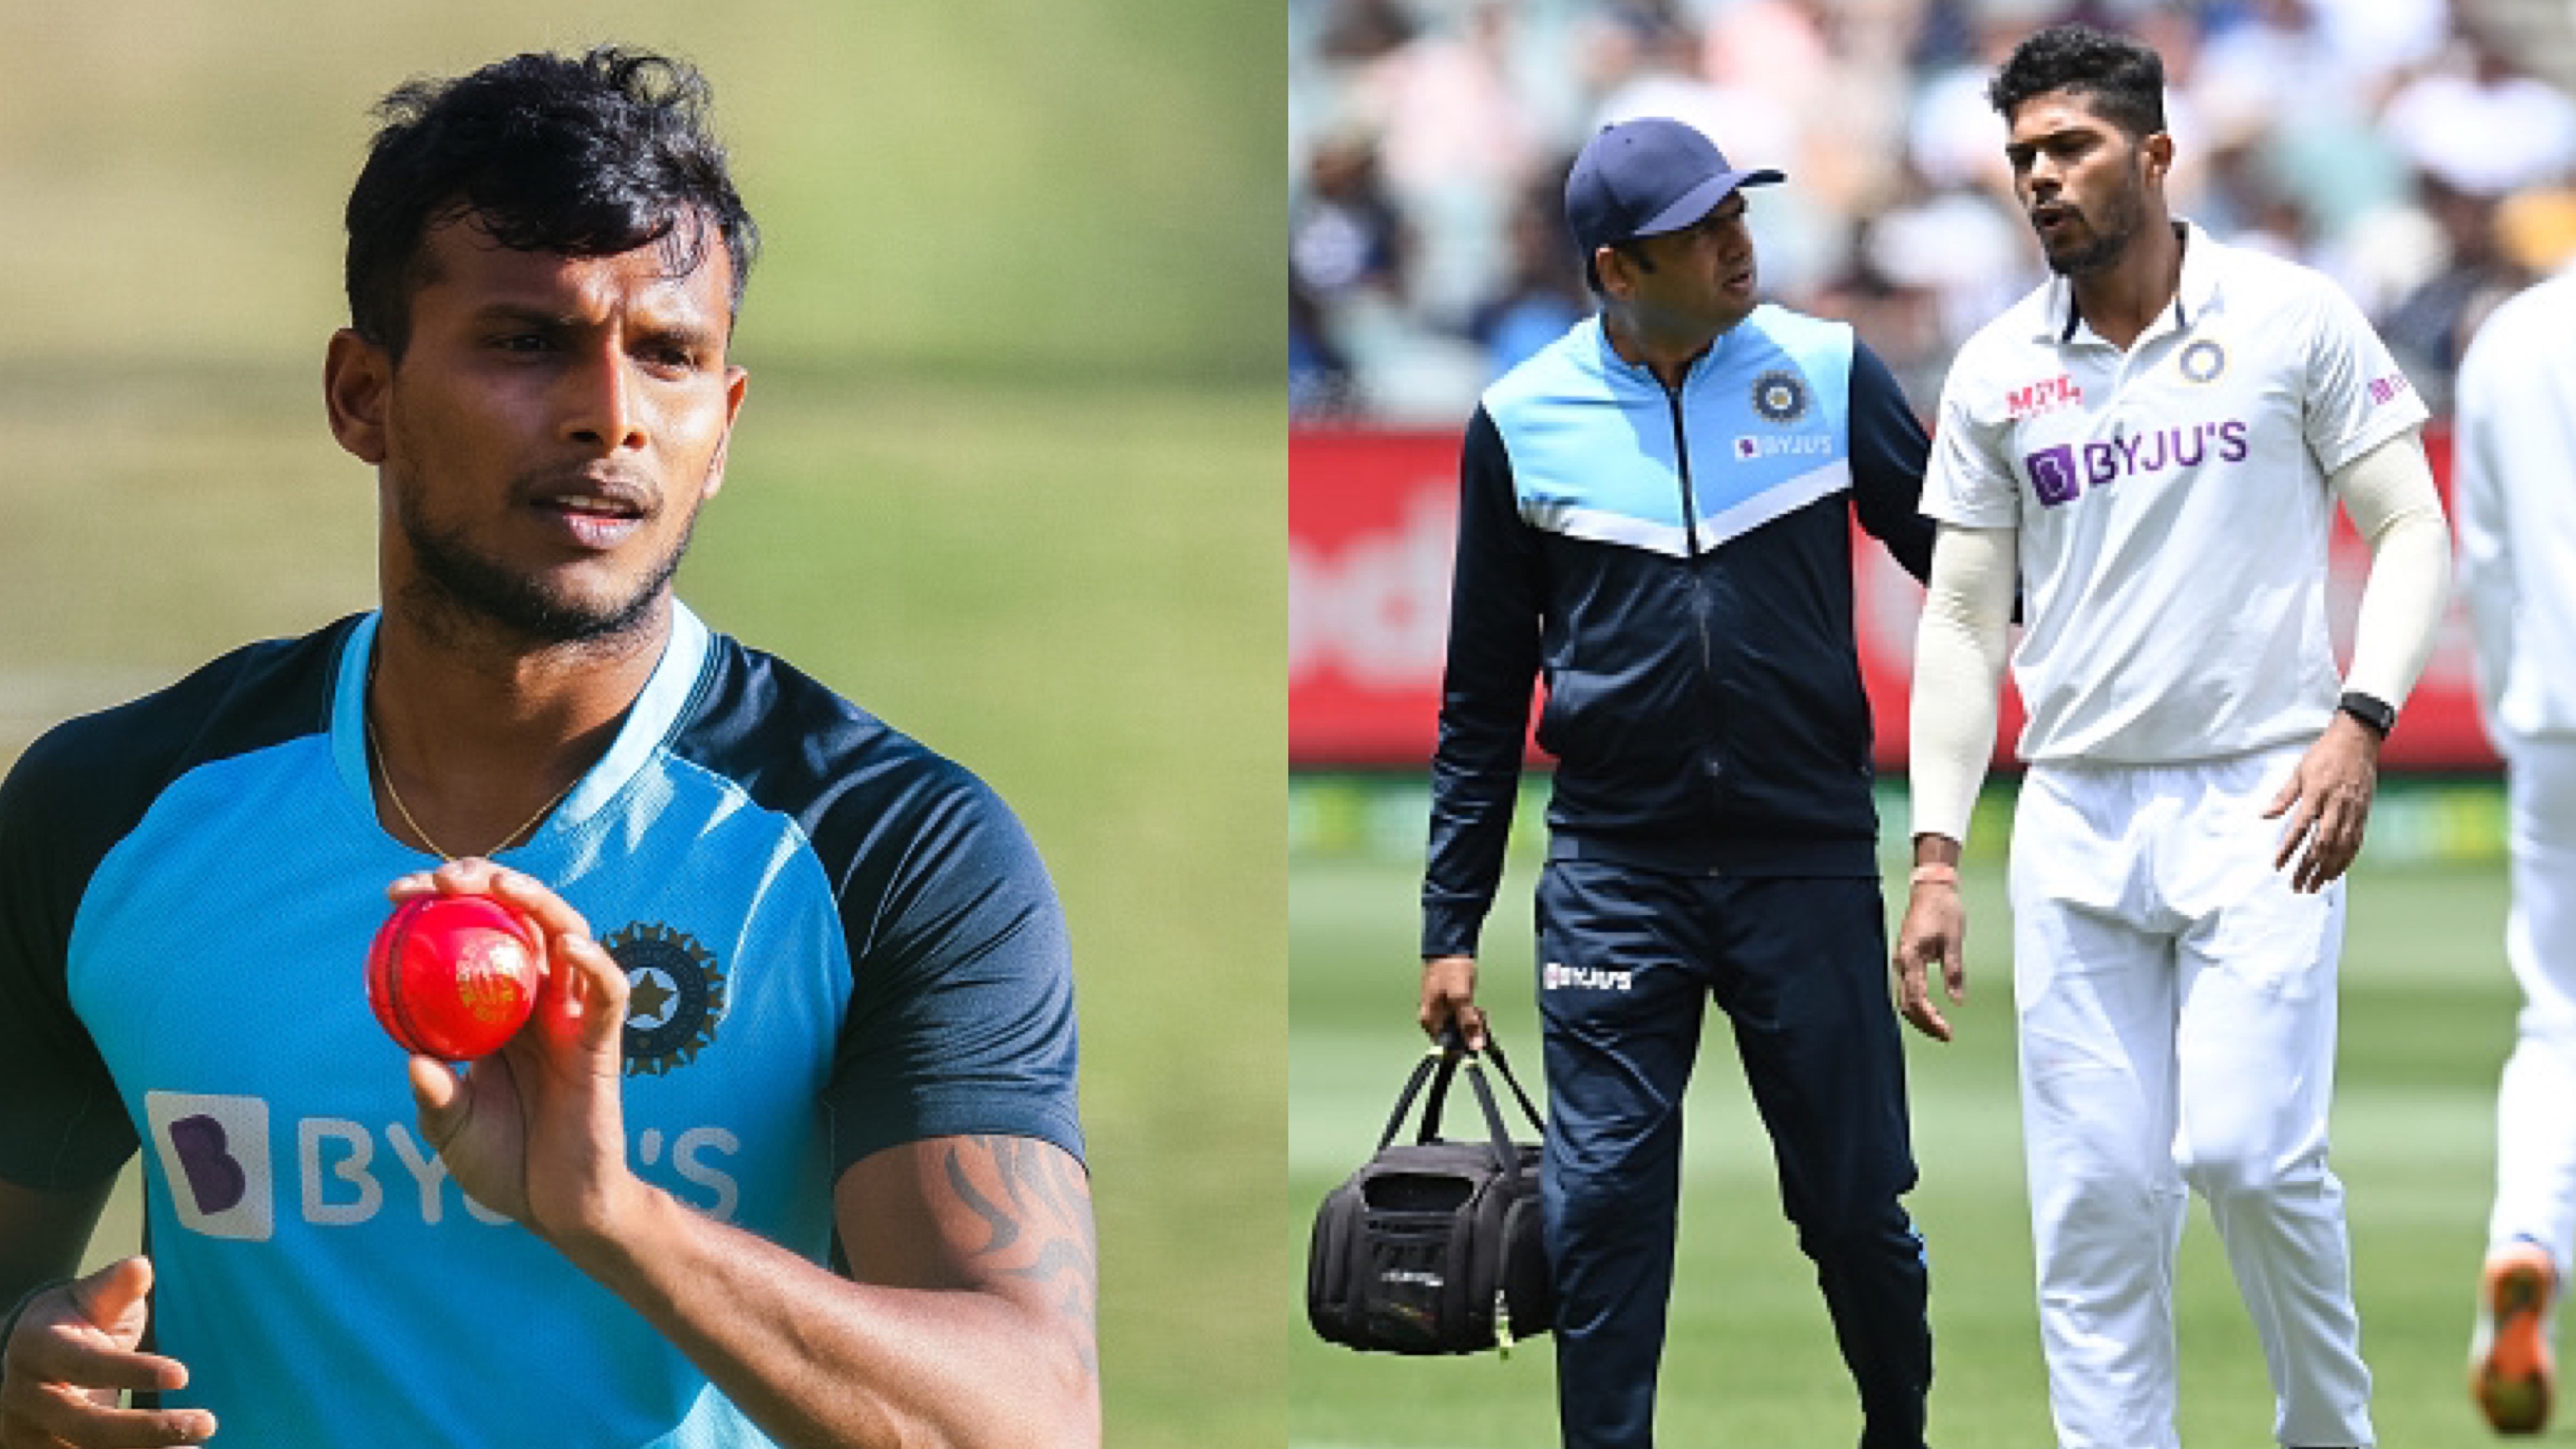 AUS v IND 2020-21: T Natarajan replaces Umesh Yadav in India's squad for last 2 Tests